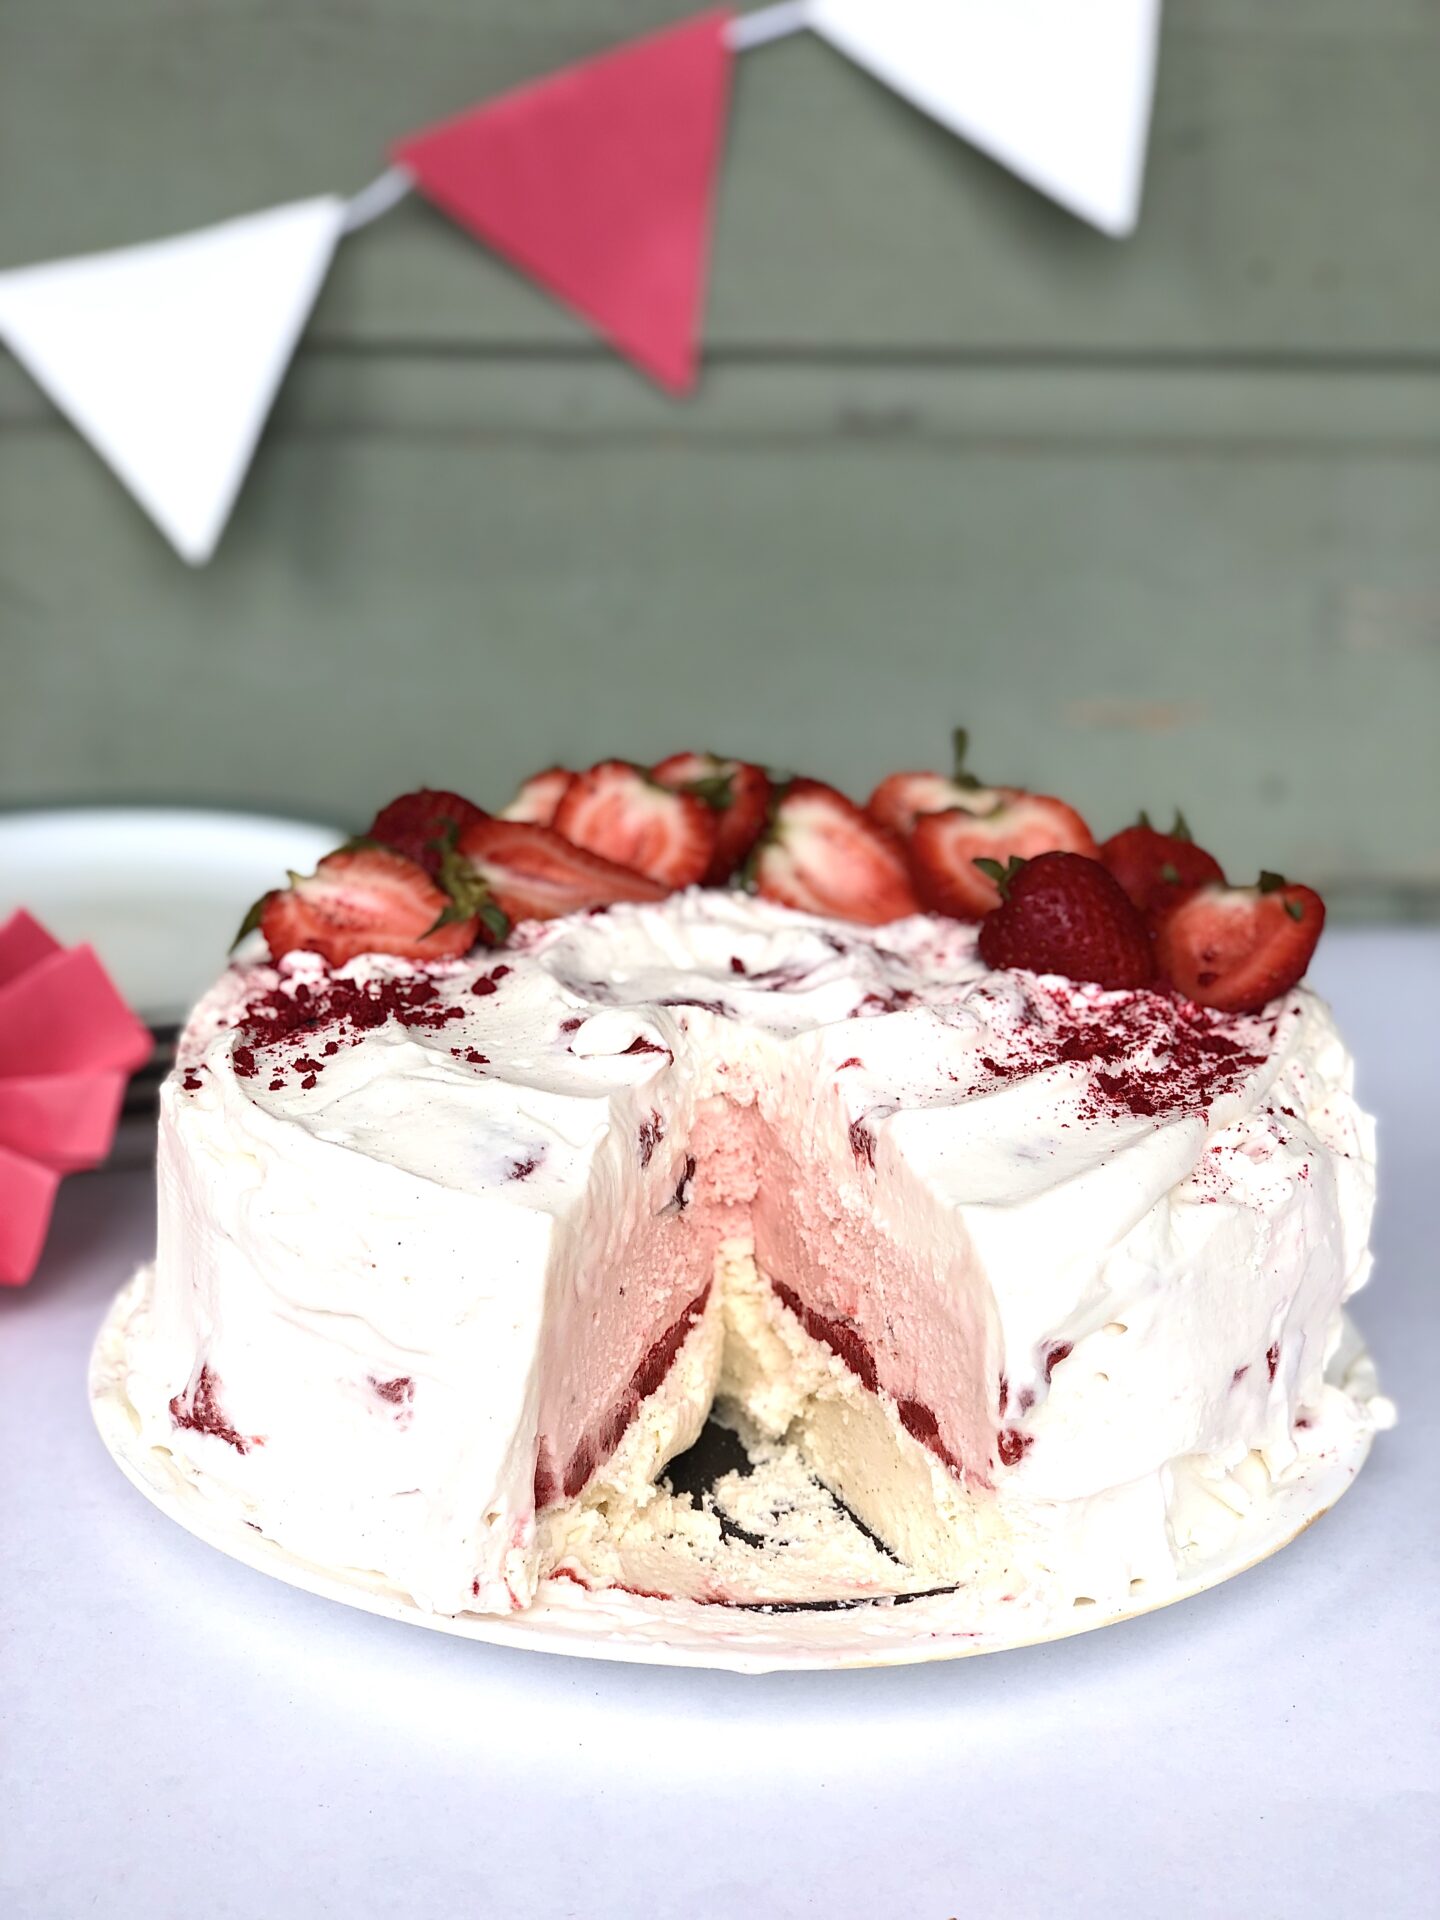 Strawberries and Cream Ice Cream Cake with slice removed to reveal layers